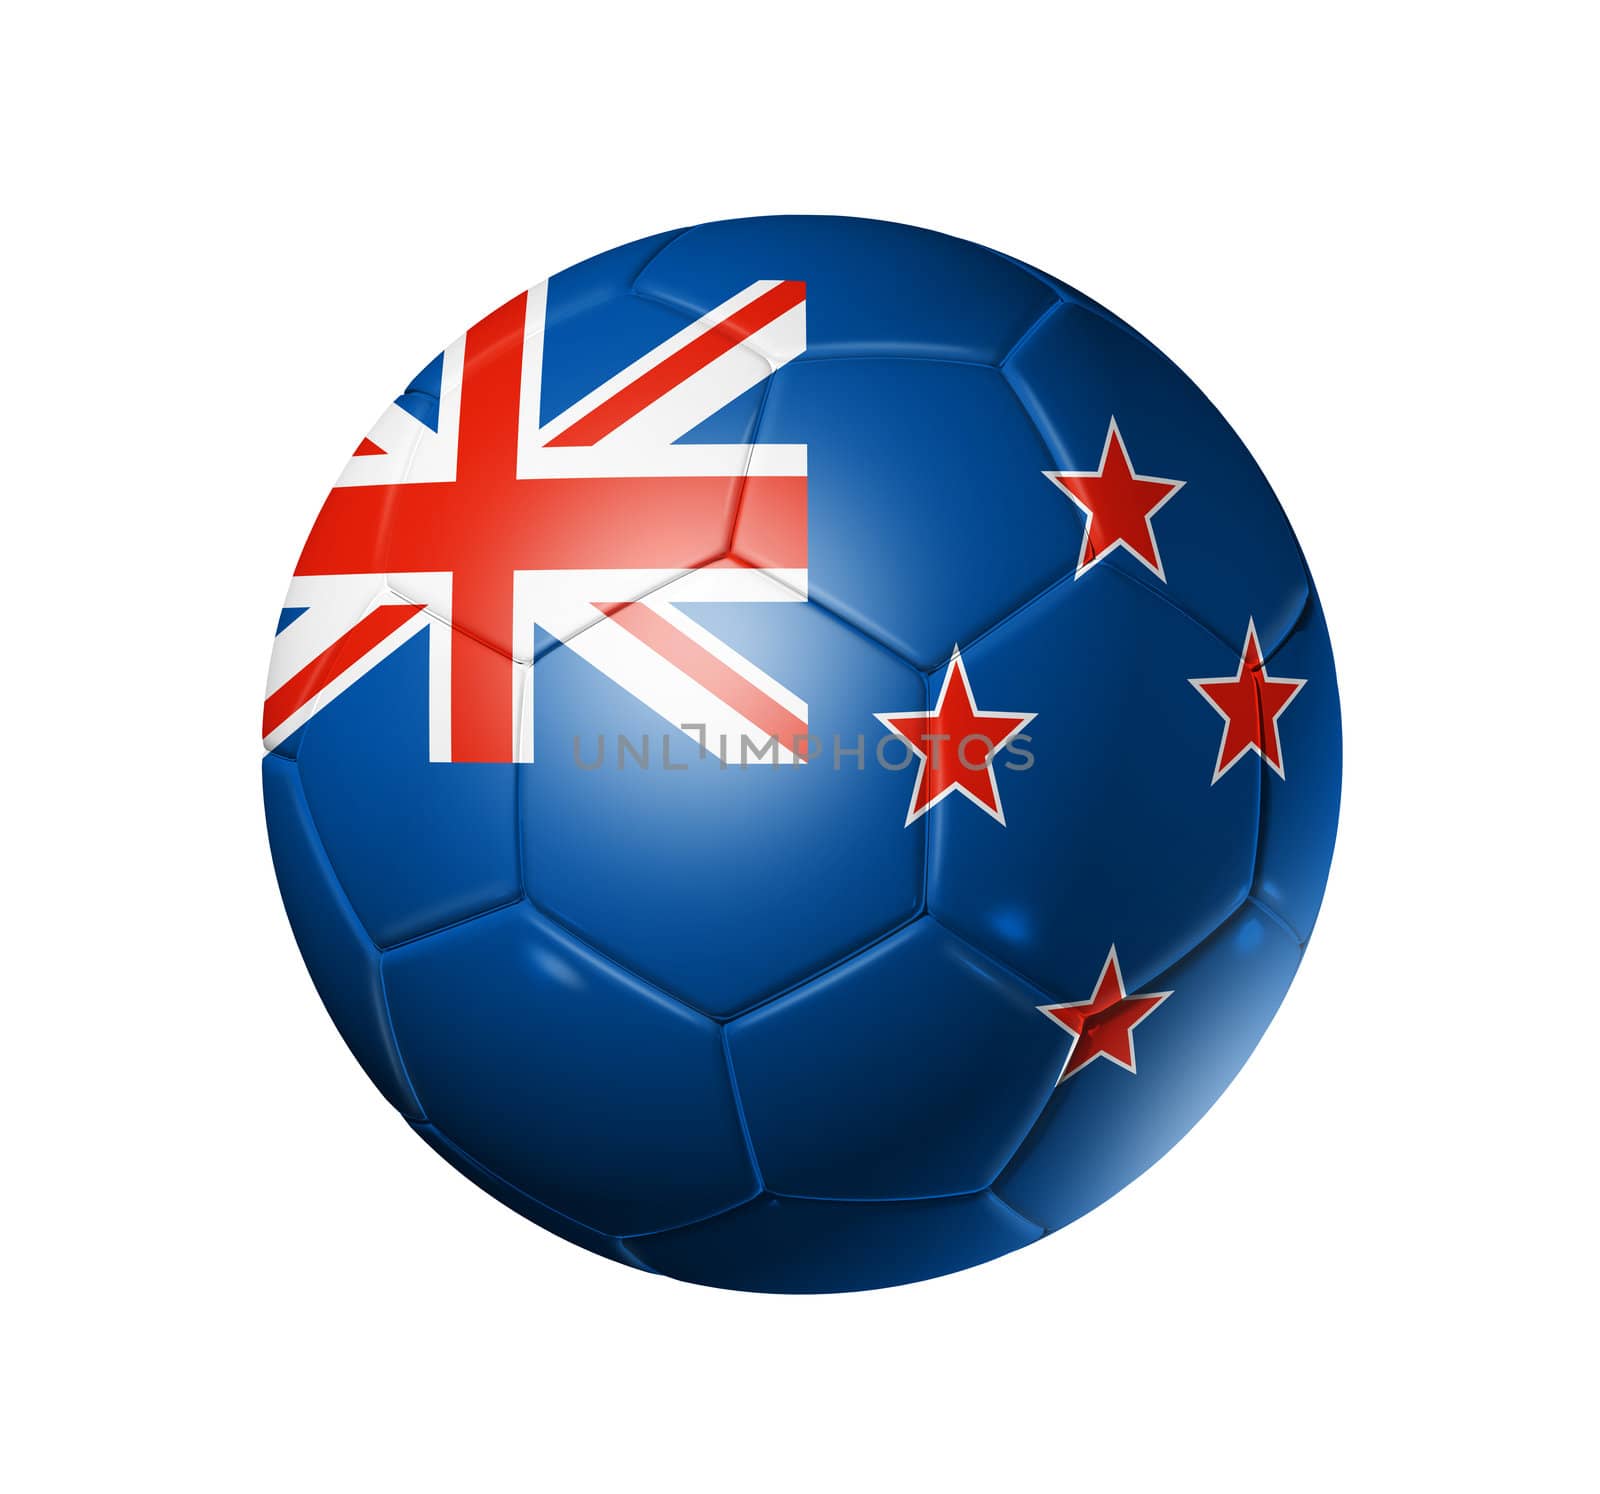 3D soccer ball with New Zealand team flag, world football cup 2010. isolated on white with clipping path